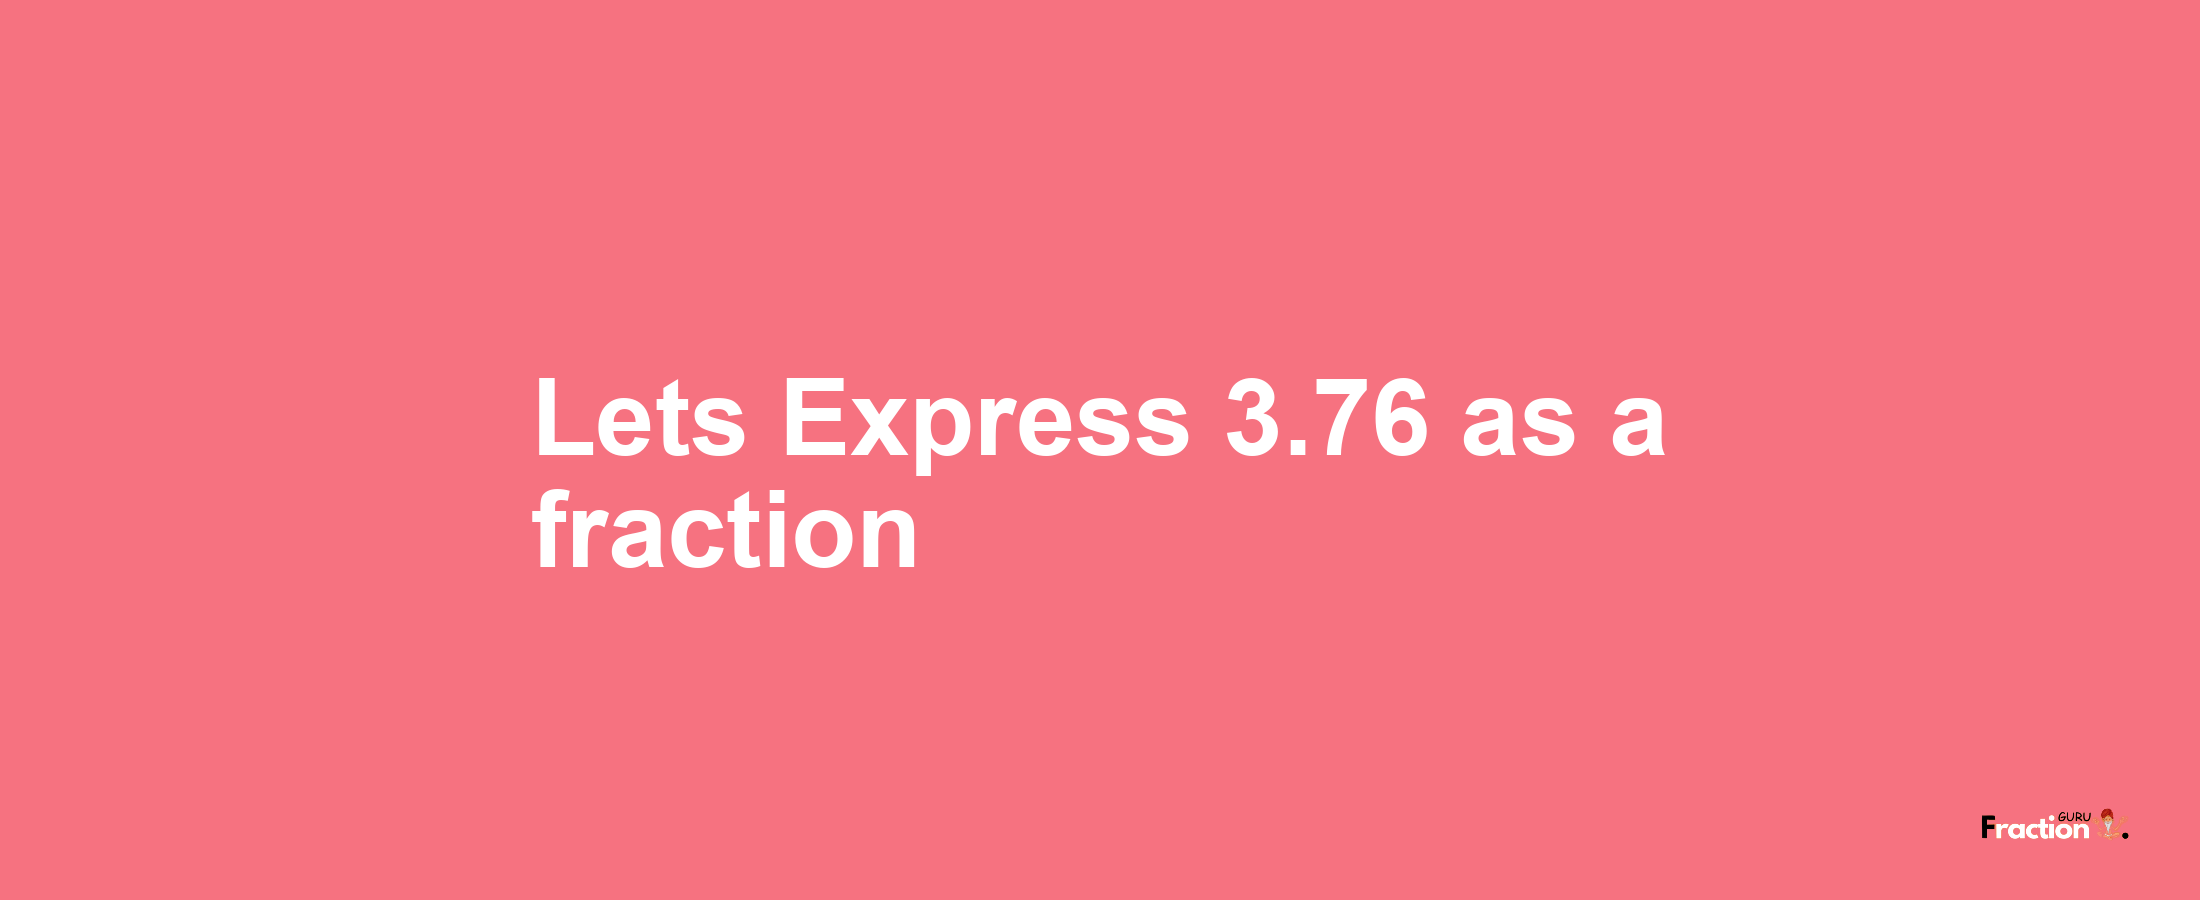 Lets Express 3.76 as afraction